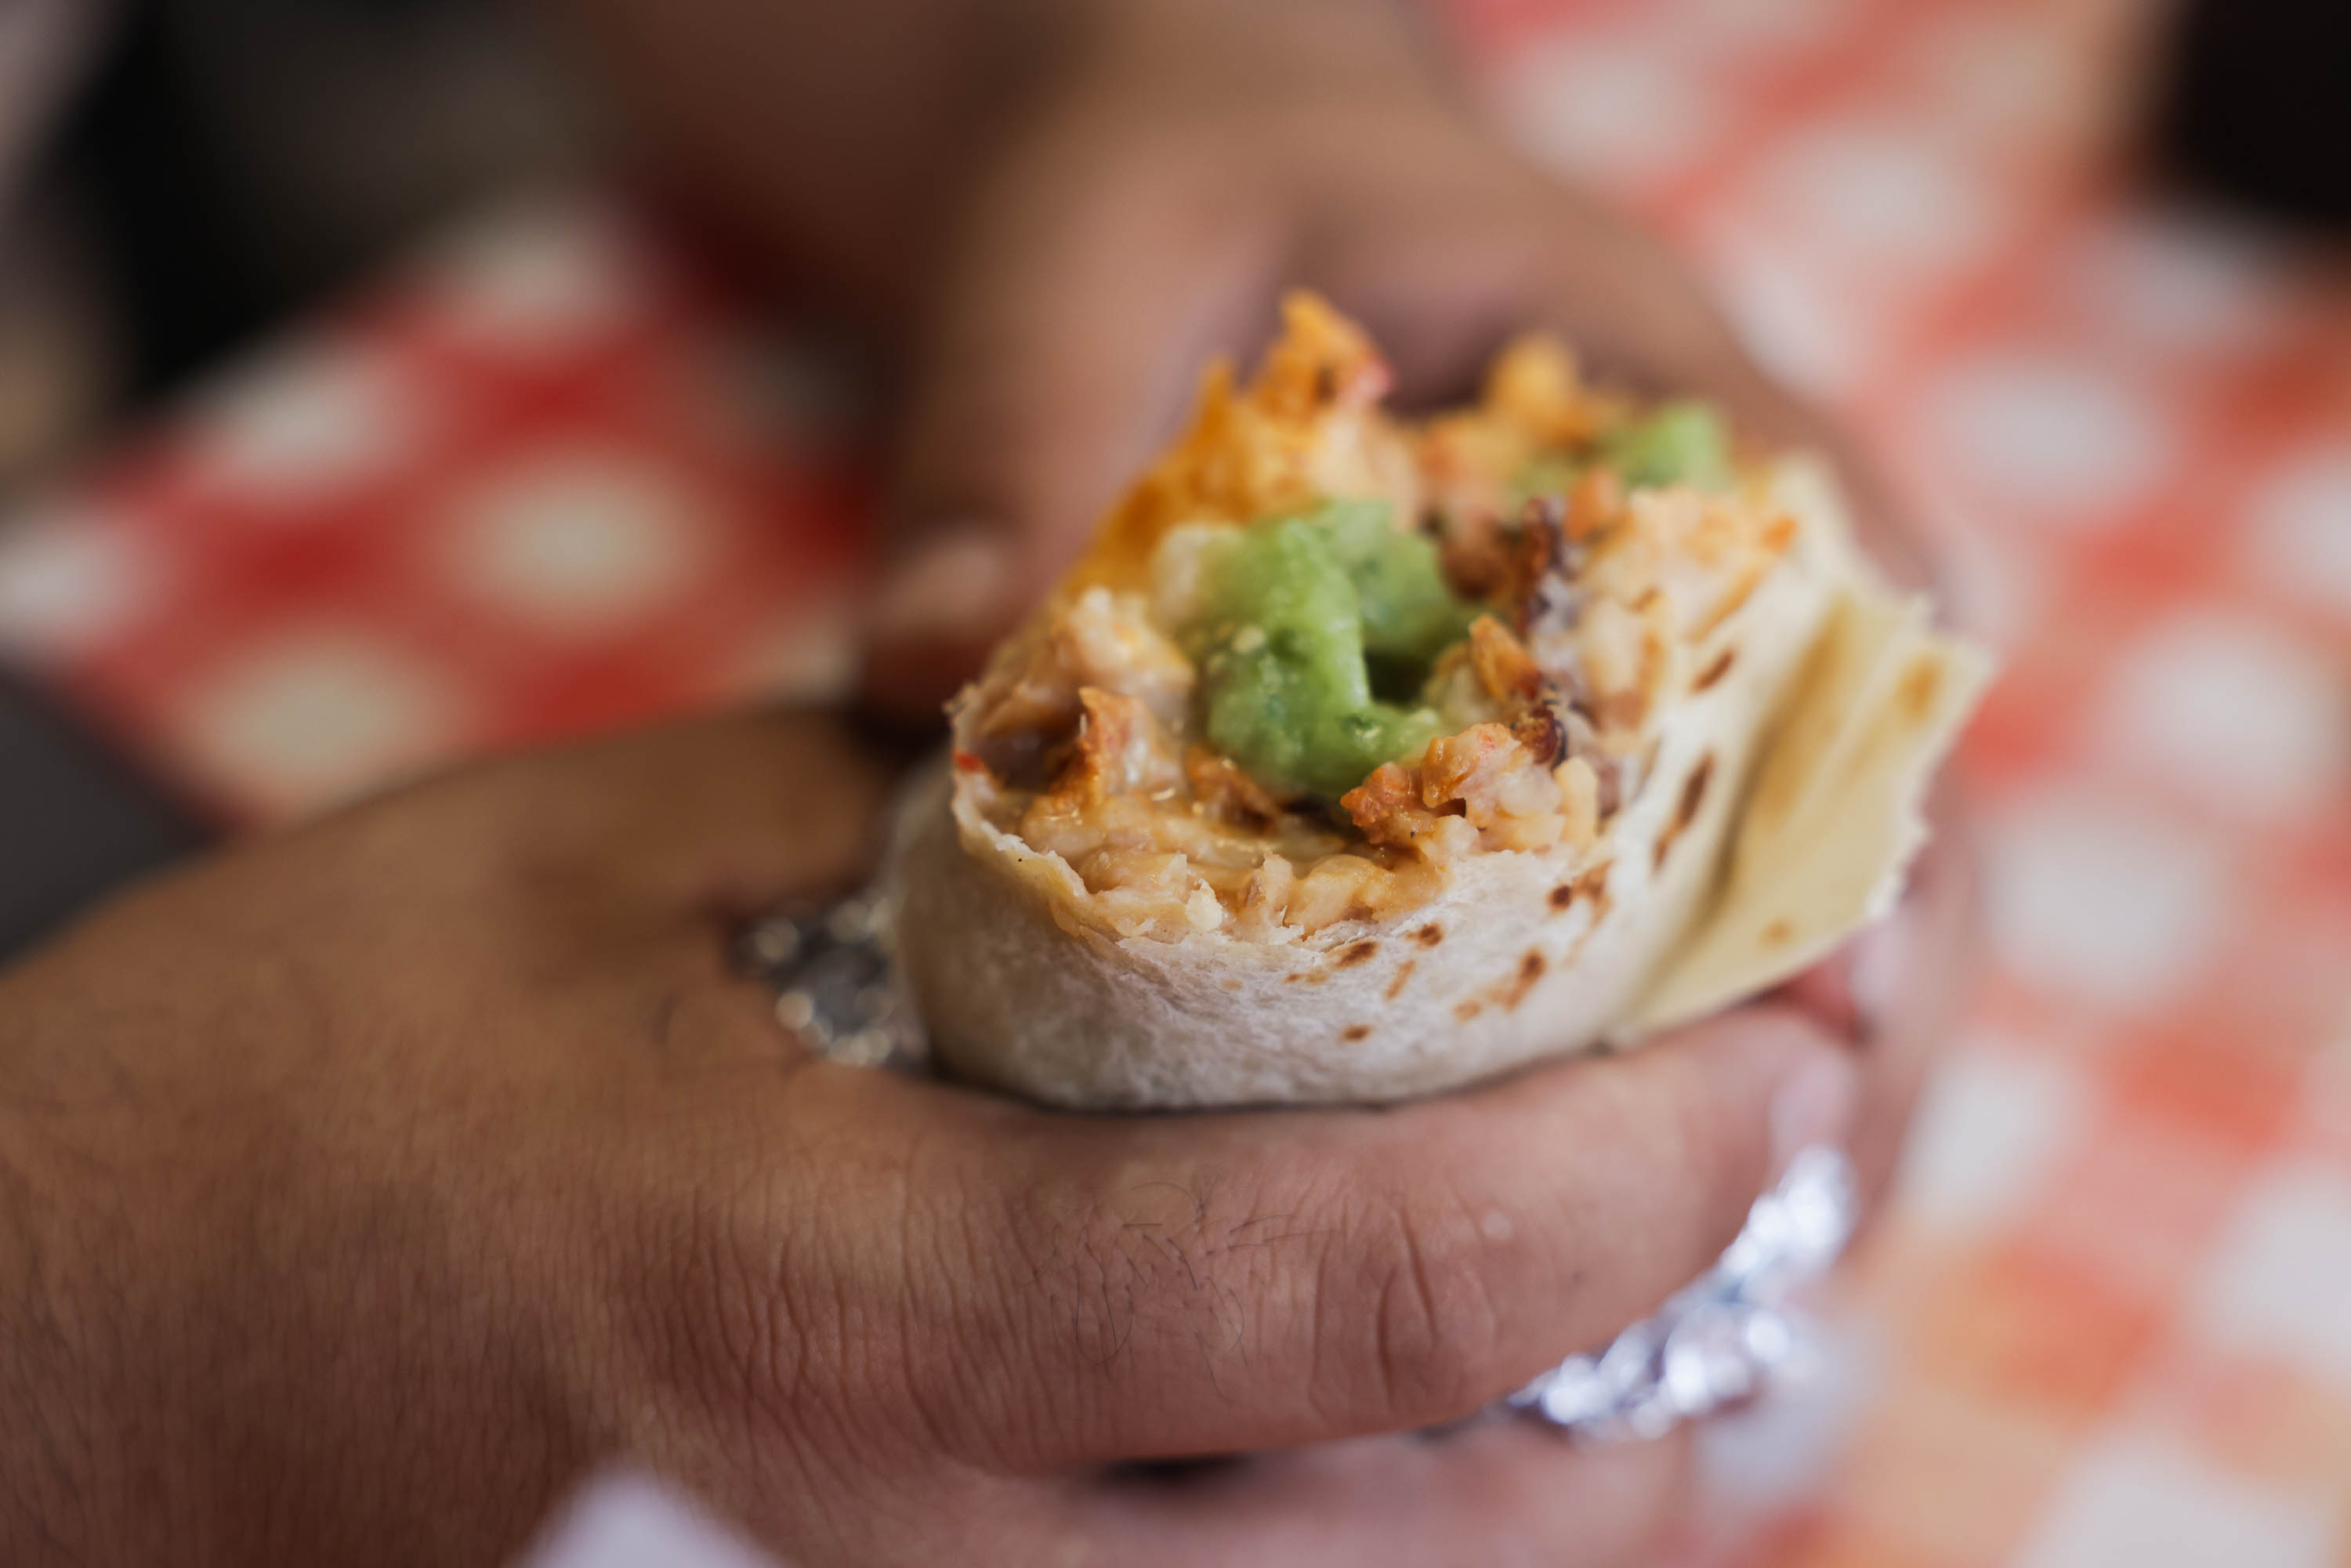 A half-eaten burrito with fillings visible, held in a hand over a checkered tablecloth.